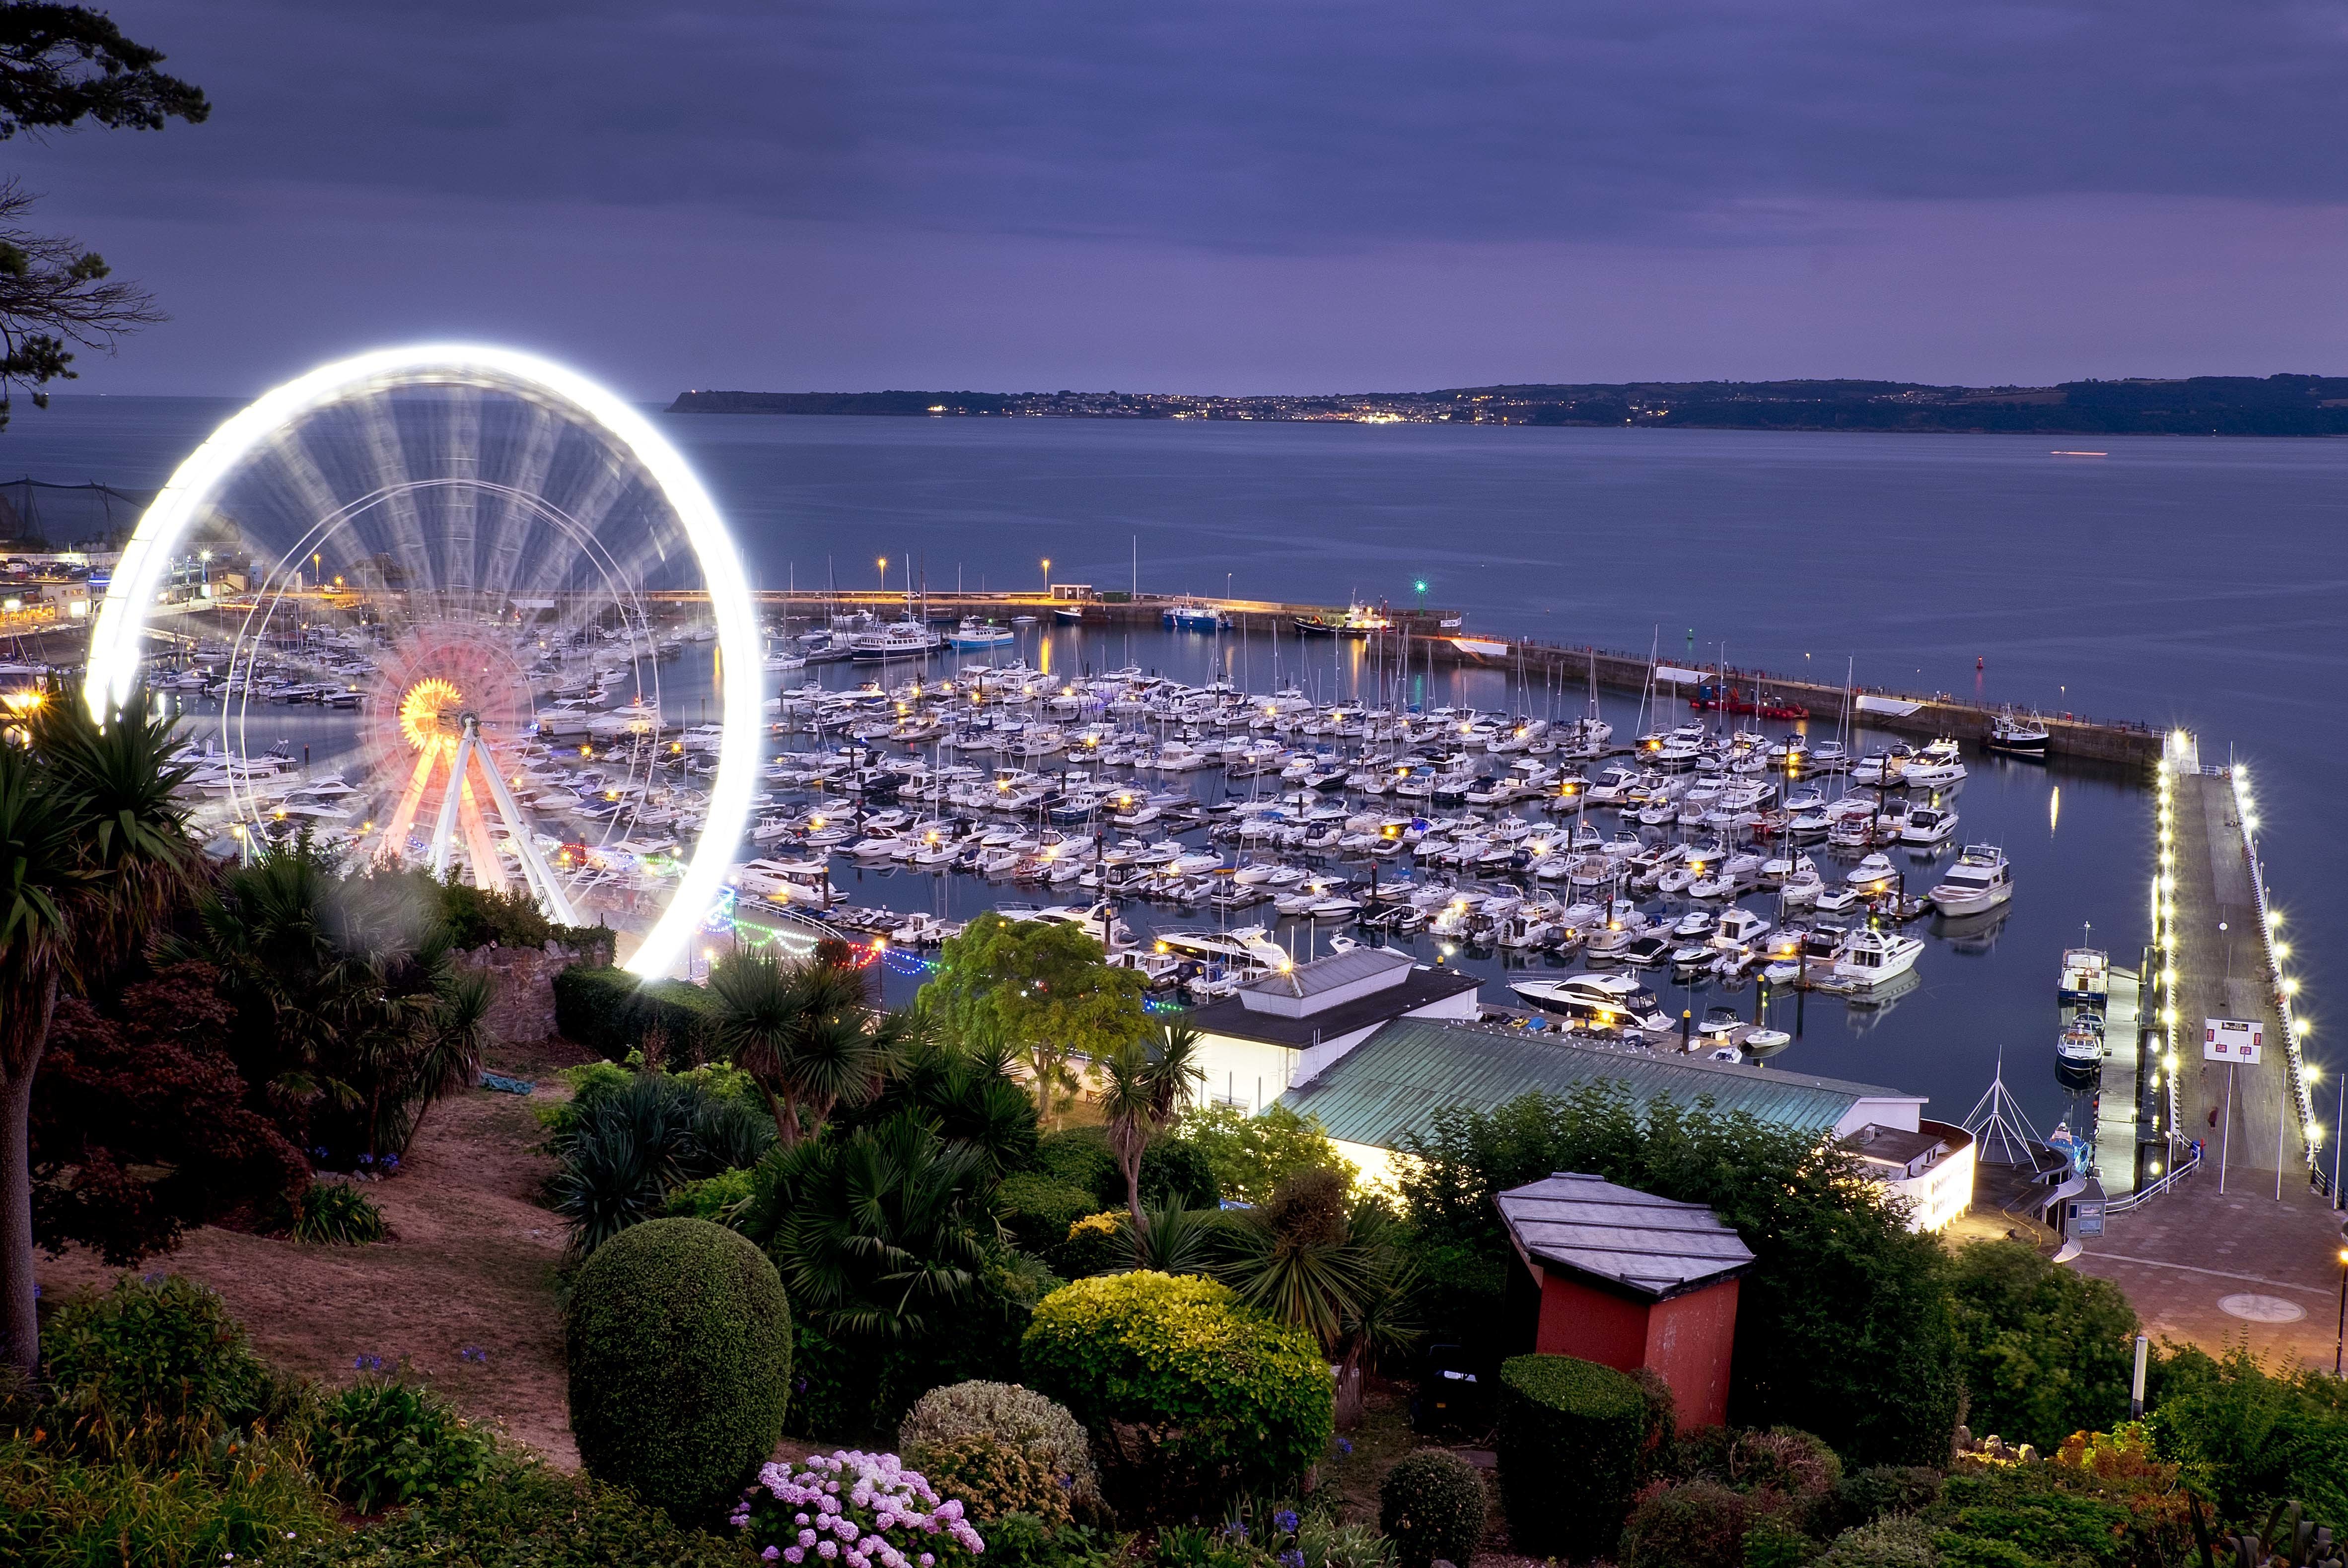 A ferris wheel turns next to the harbor in Torquay on the south coast of England, on Saturday, July 21, 2018. AP Photo/Michael Probst)